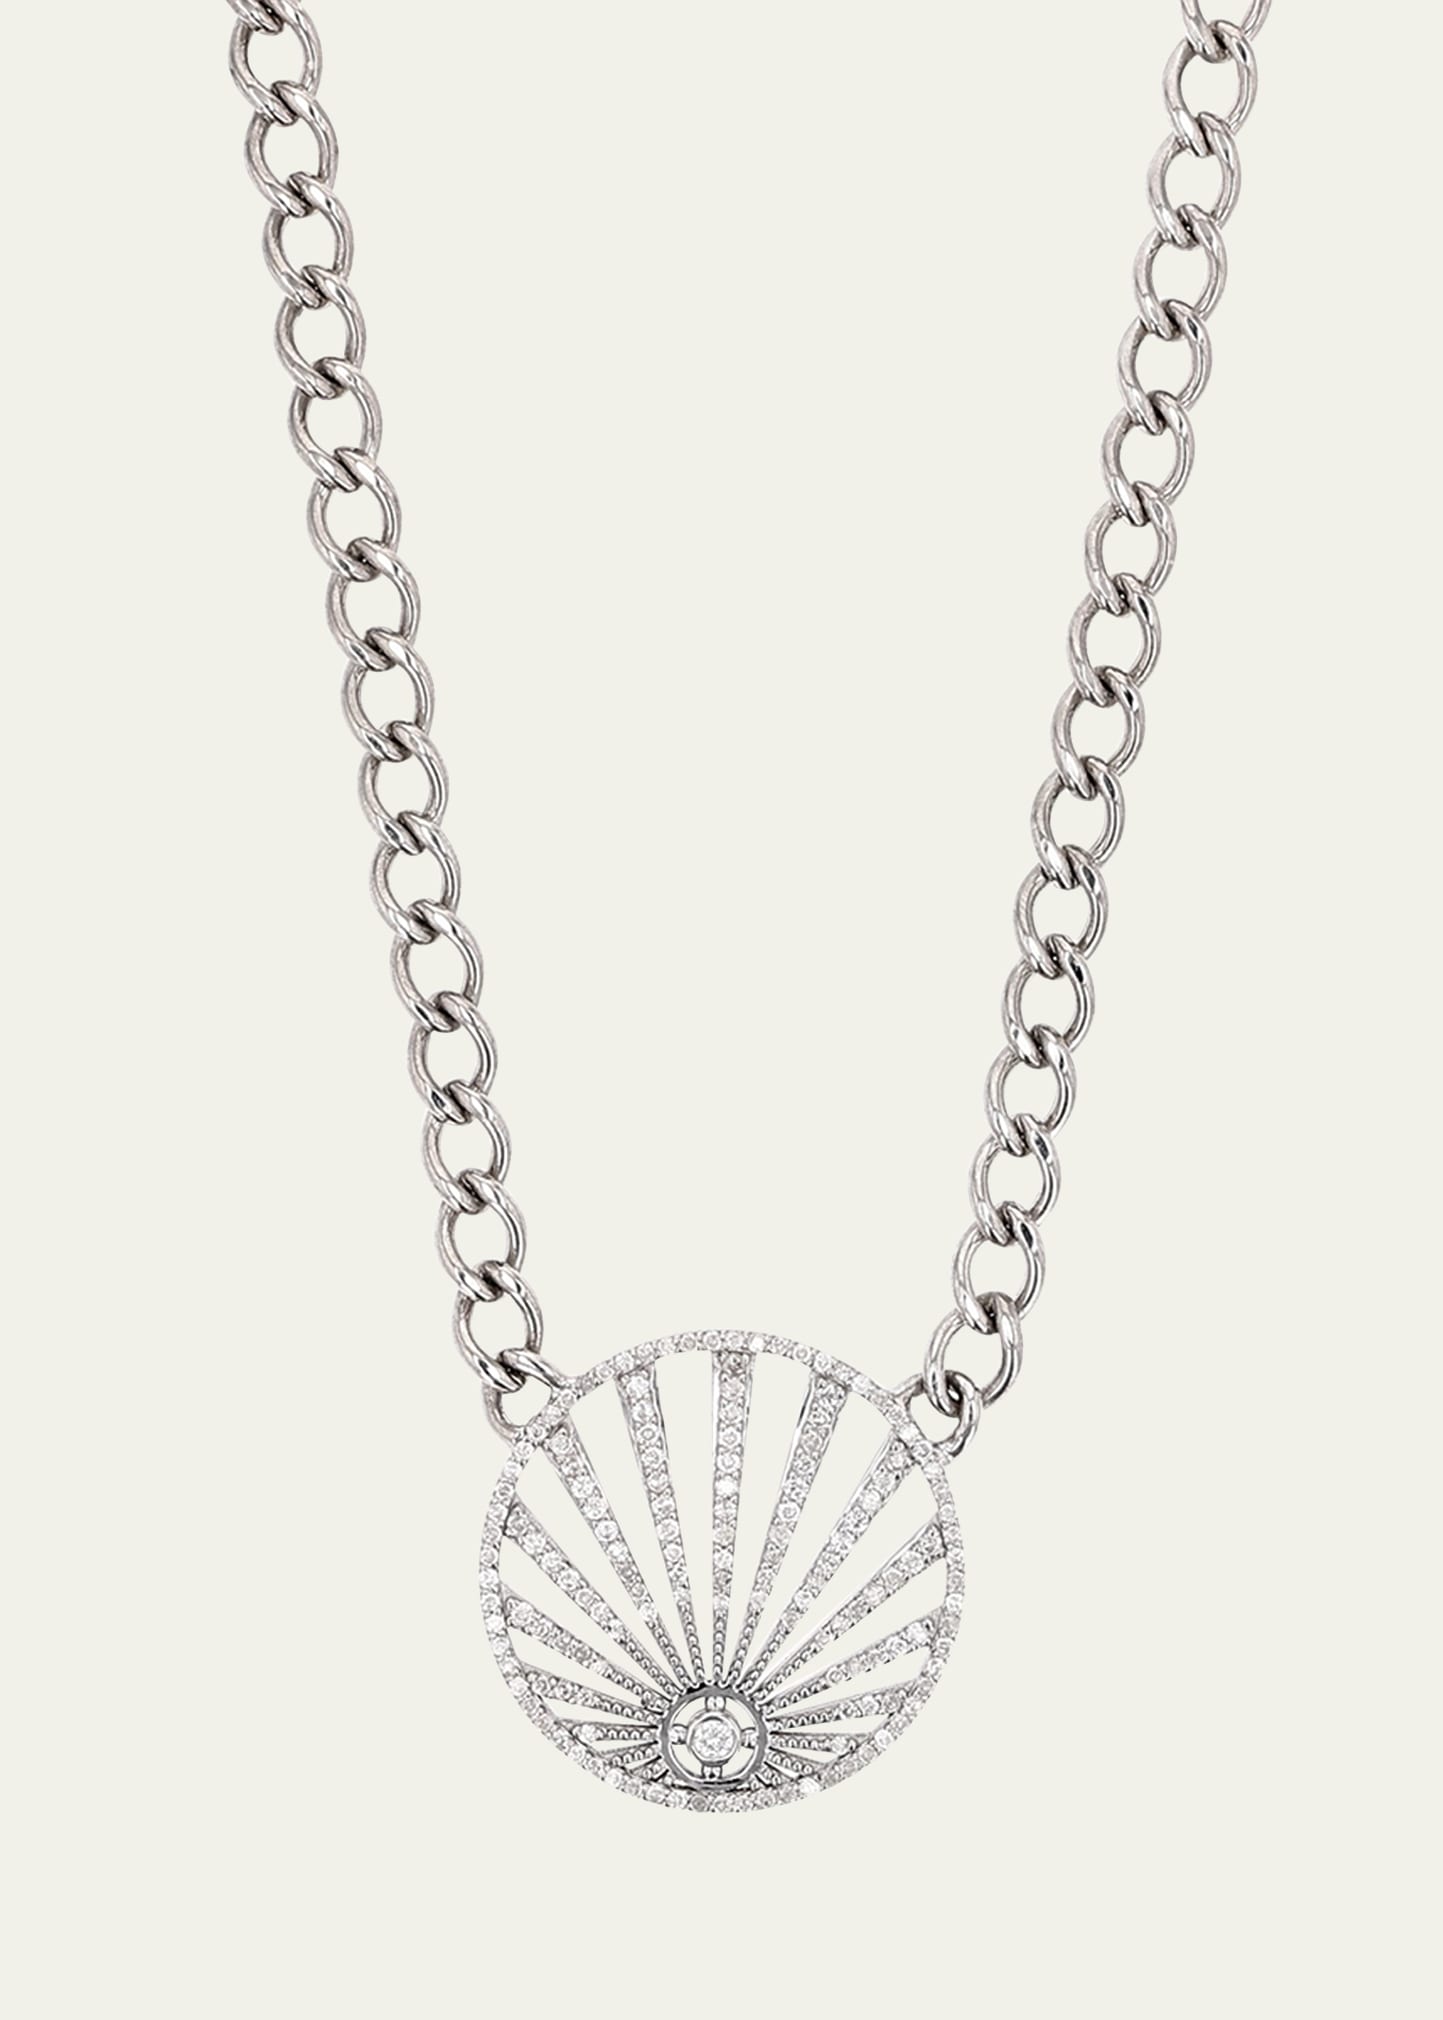 Sun Ray Necklace with Pave Diamonds, 17"L